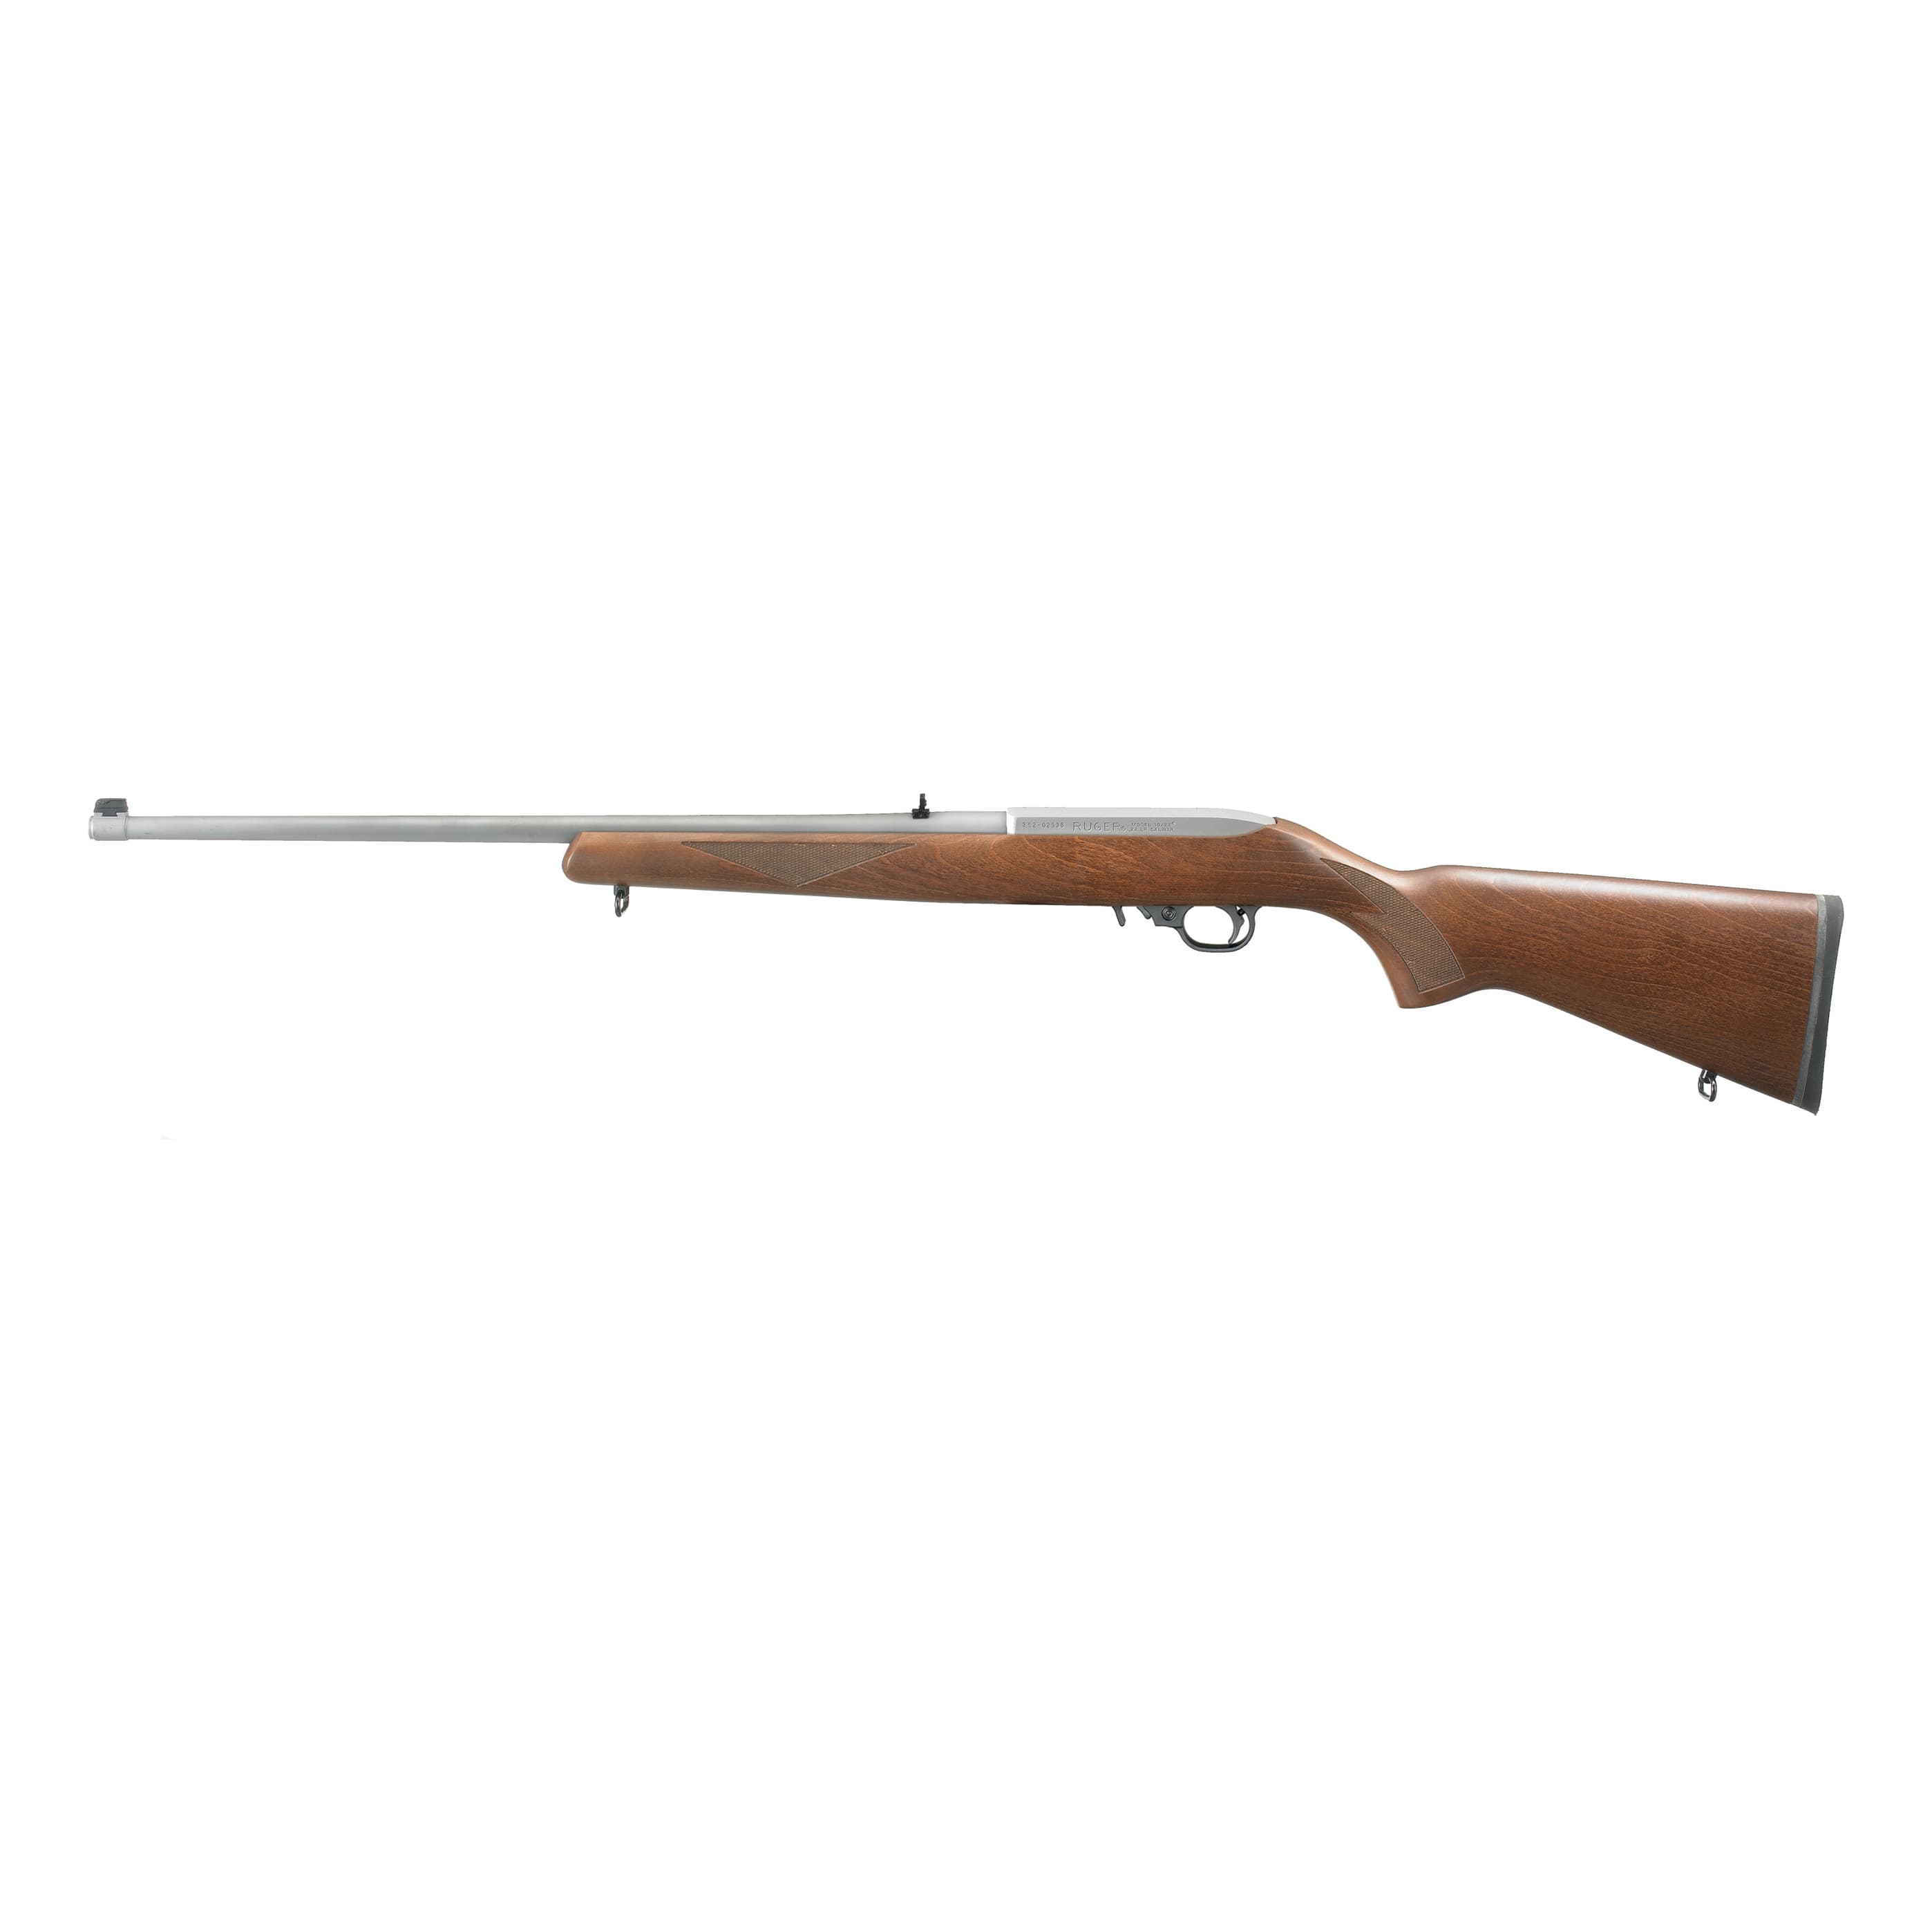 Ruger® 10/22® Birchwood Sporter Semi-Automatic Rifle - Stainless Steel - Opposite Side View